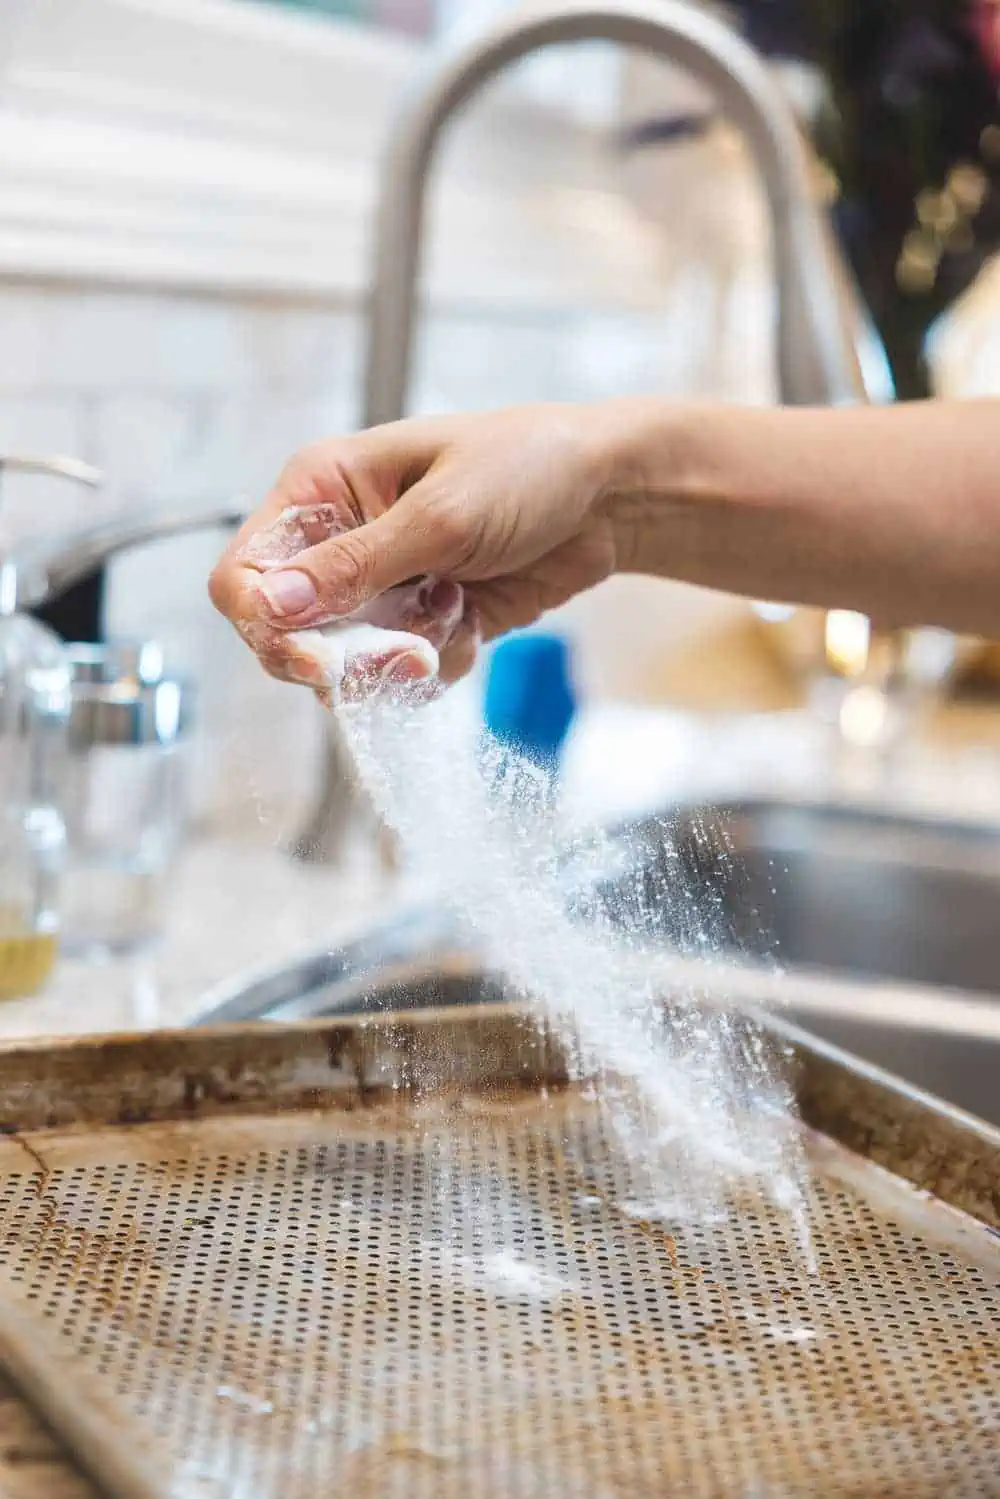 Hand-Washing Dishes Is More Fun With Fancy Soap and Sparkly Sponges